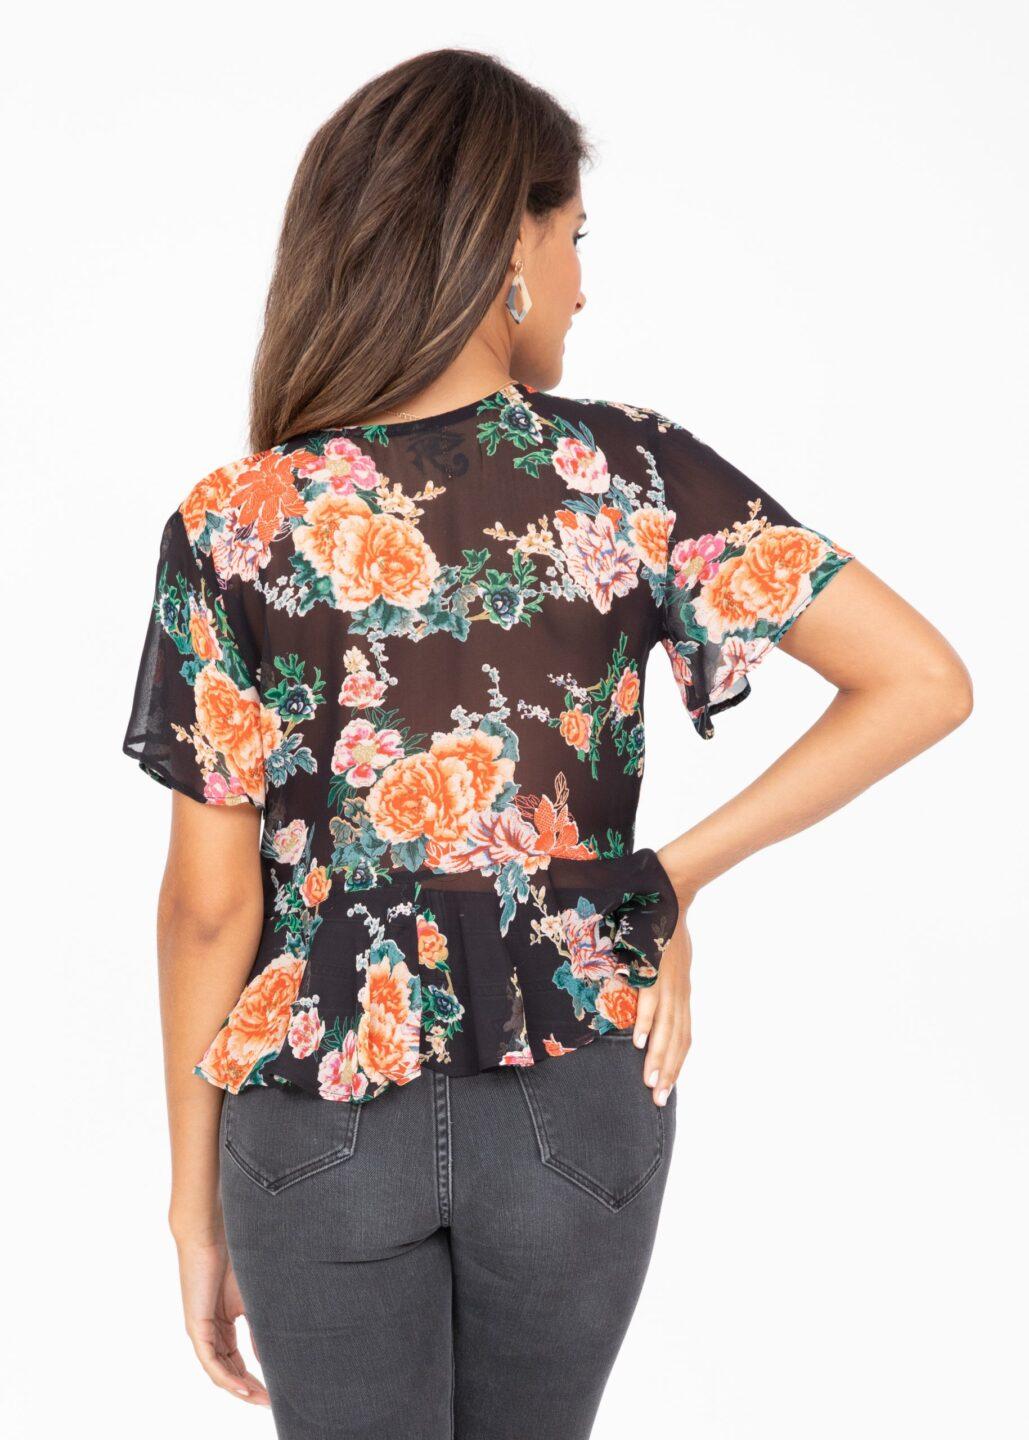 Short Butterfly Sleeve Top In Floral Print Likemary